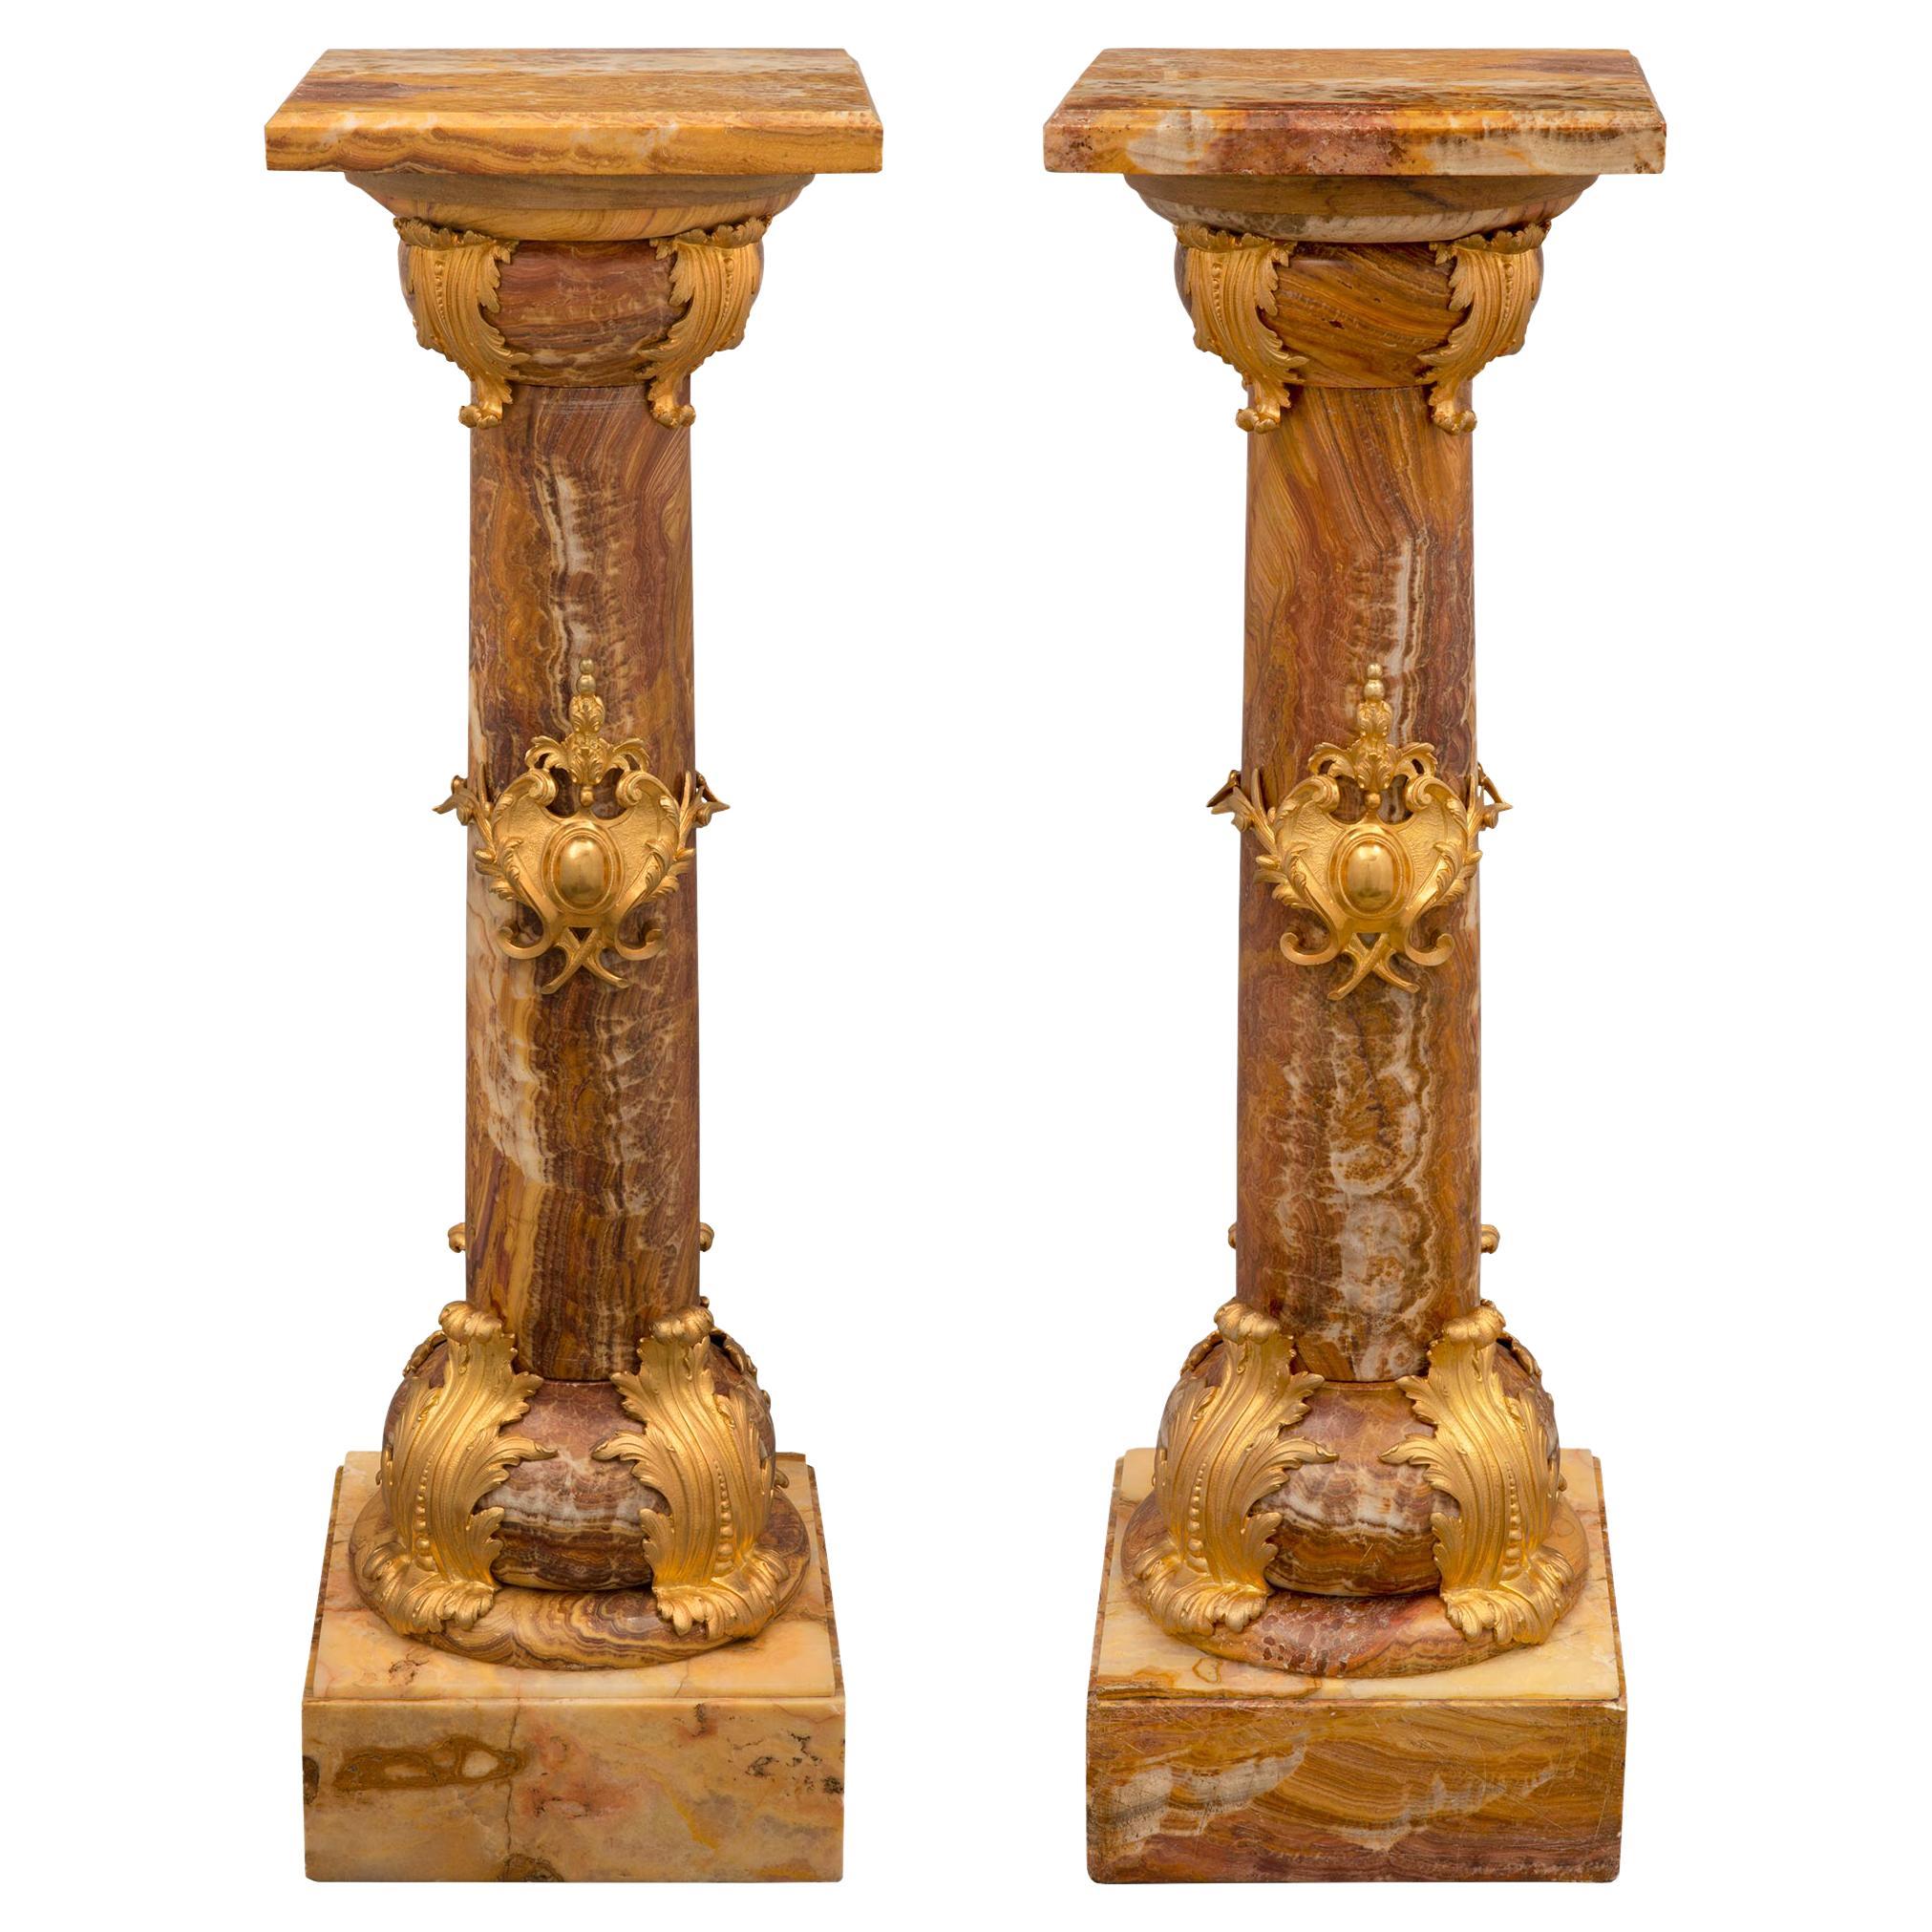 Pair of French 19th Century Belle Époque Period Onyx & Ormolu Mounted Pedestals For Sale